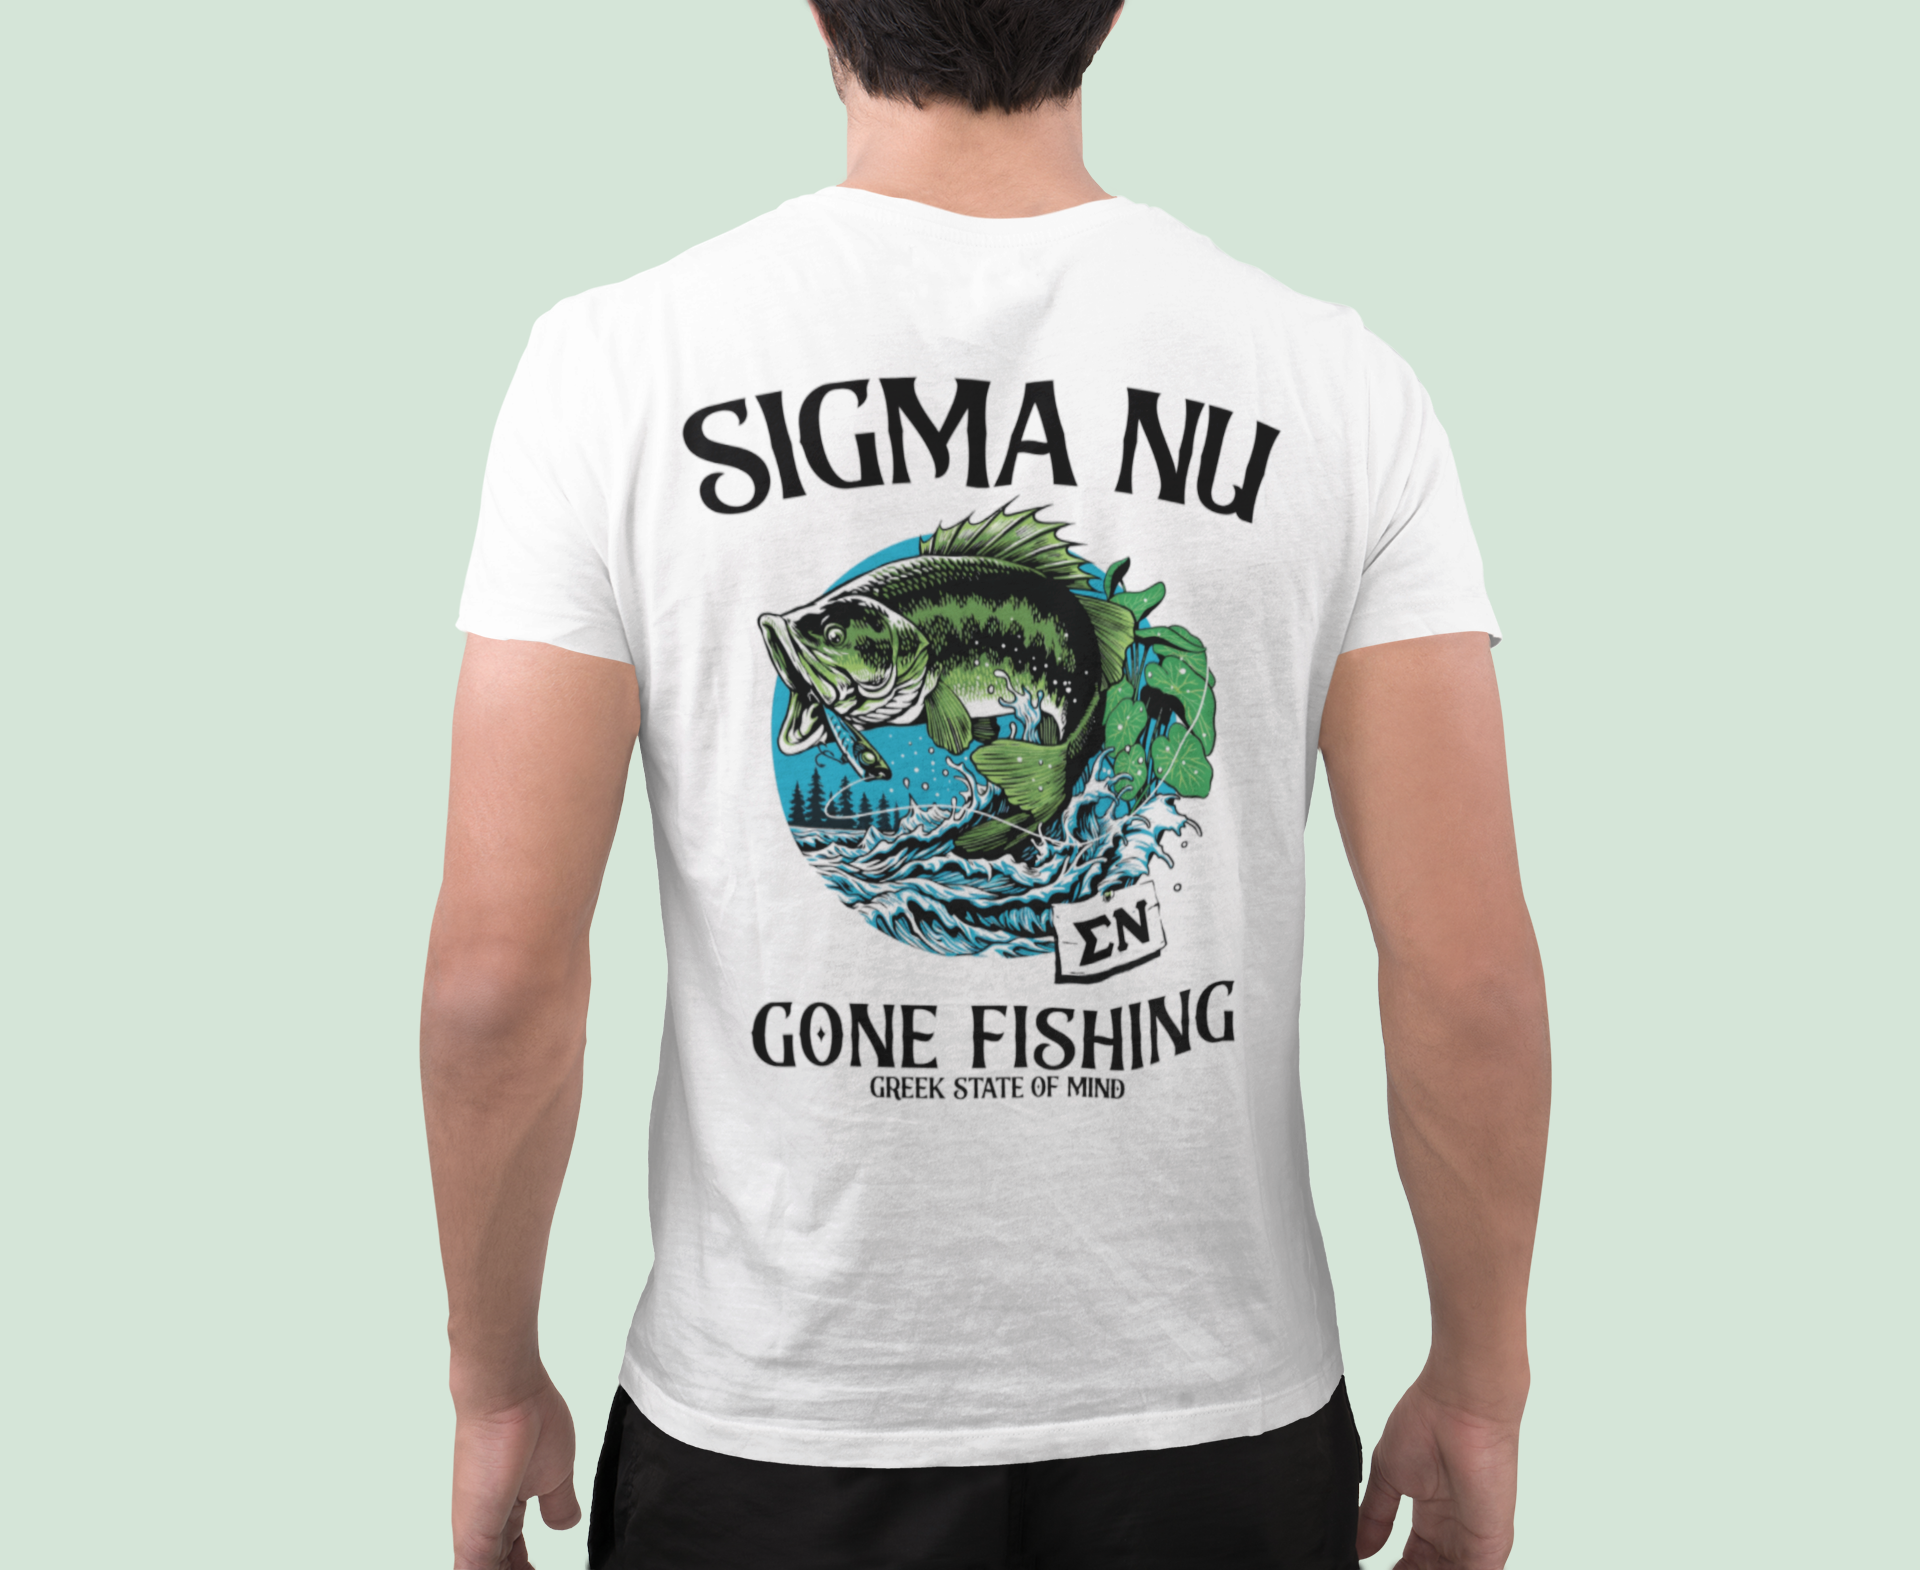 White Sigma Nu Graphic T-Shirt | Gone Fishing | Sigma Nu Clothing, Apparel and Merchandise  back model 